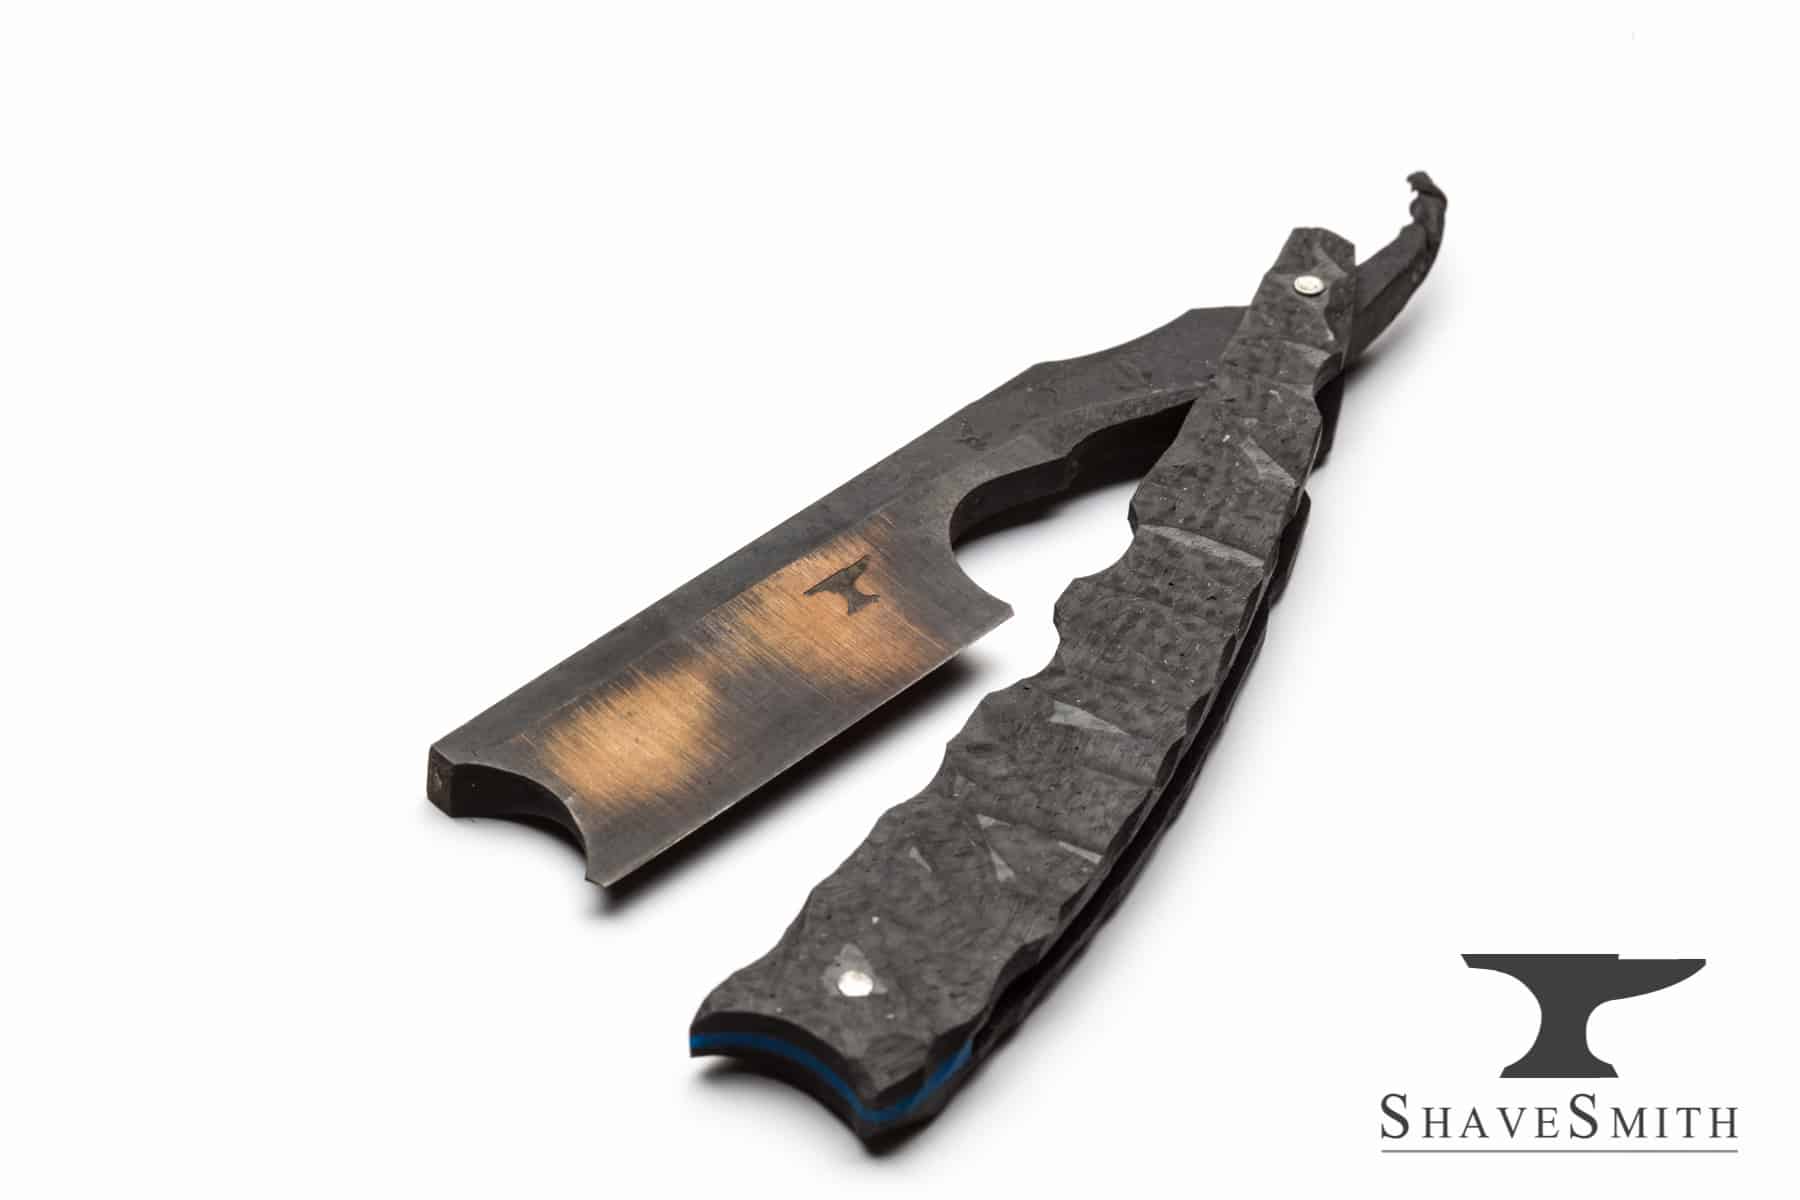 I made this custom western razor with craggy and hewn textures and colors. By the end of the craft, the razor turned into one of the most unique examples of forged straight razors with one of a kind personality and a smooth shave that's unforgetable.